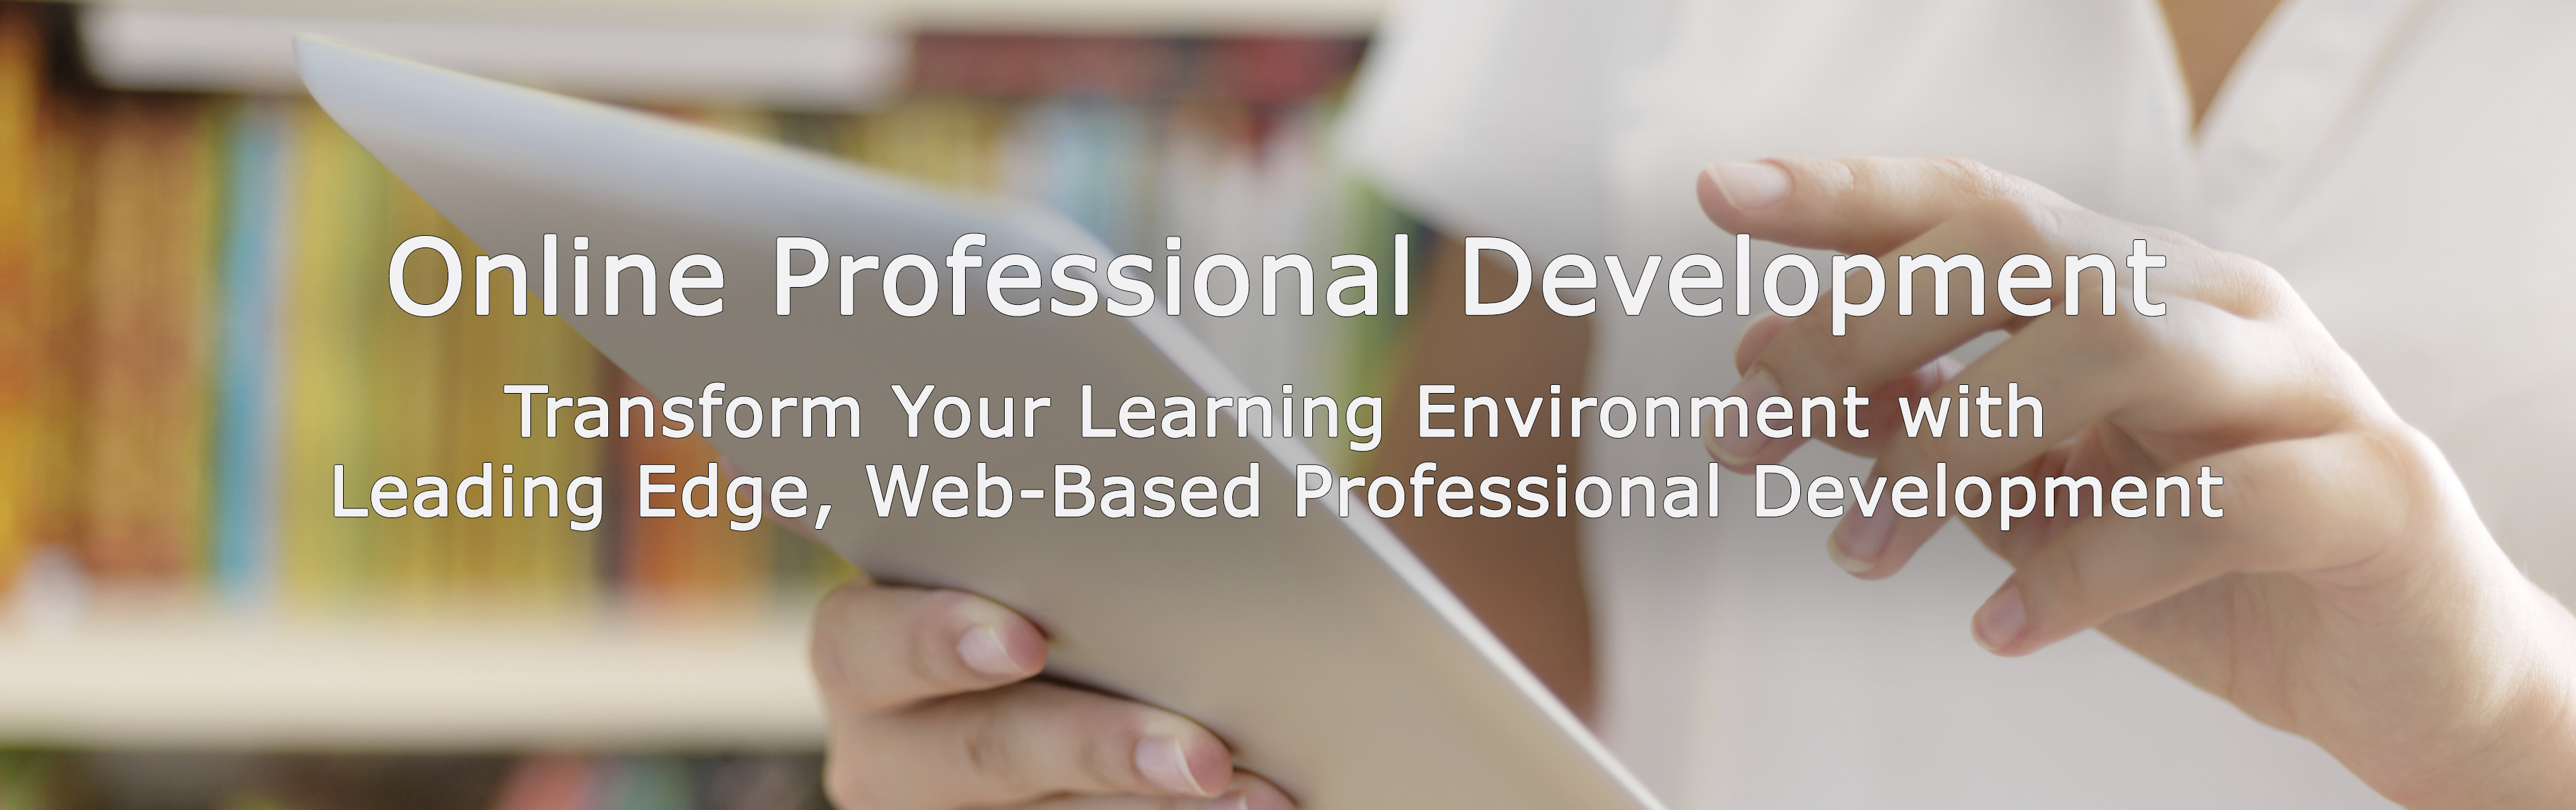 decorative with text online professional development transform your learning environment with leading edge, web-based professional development